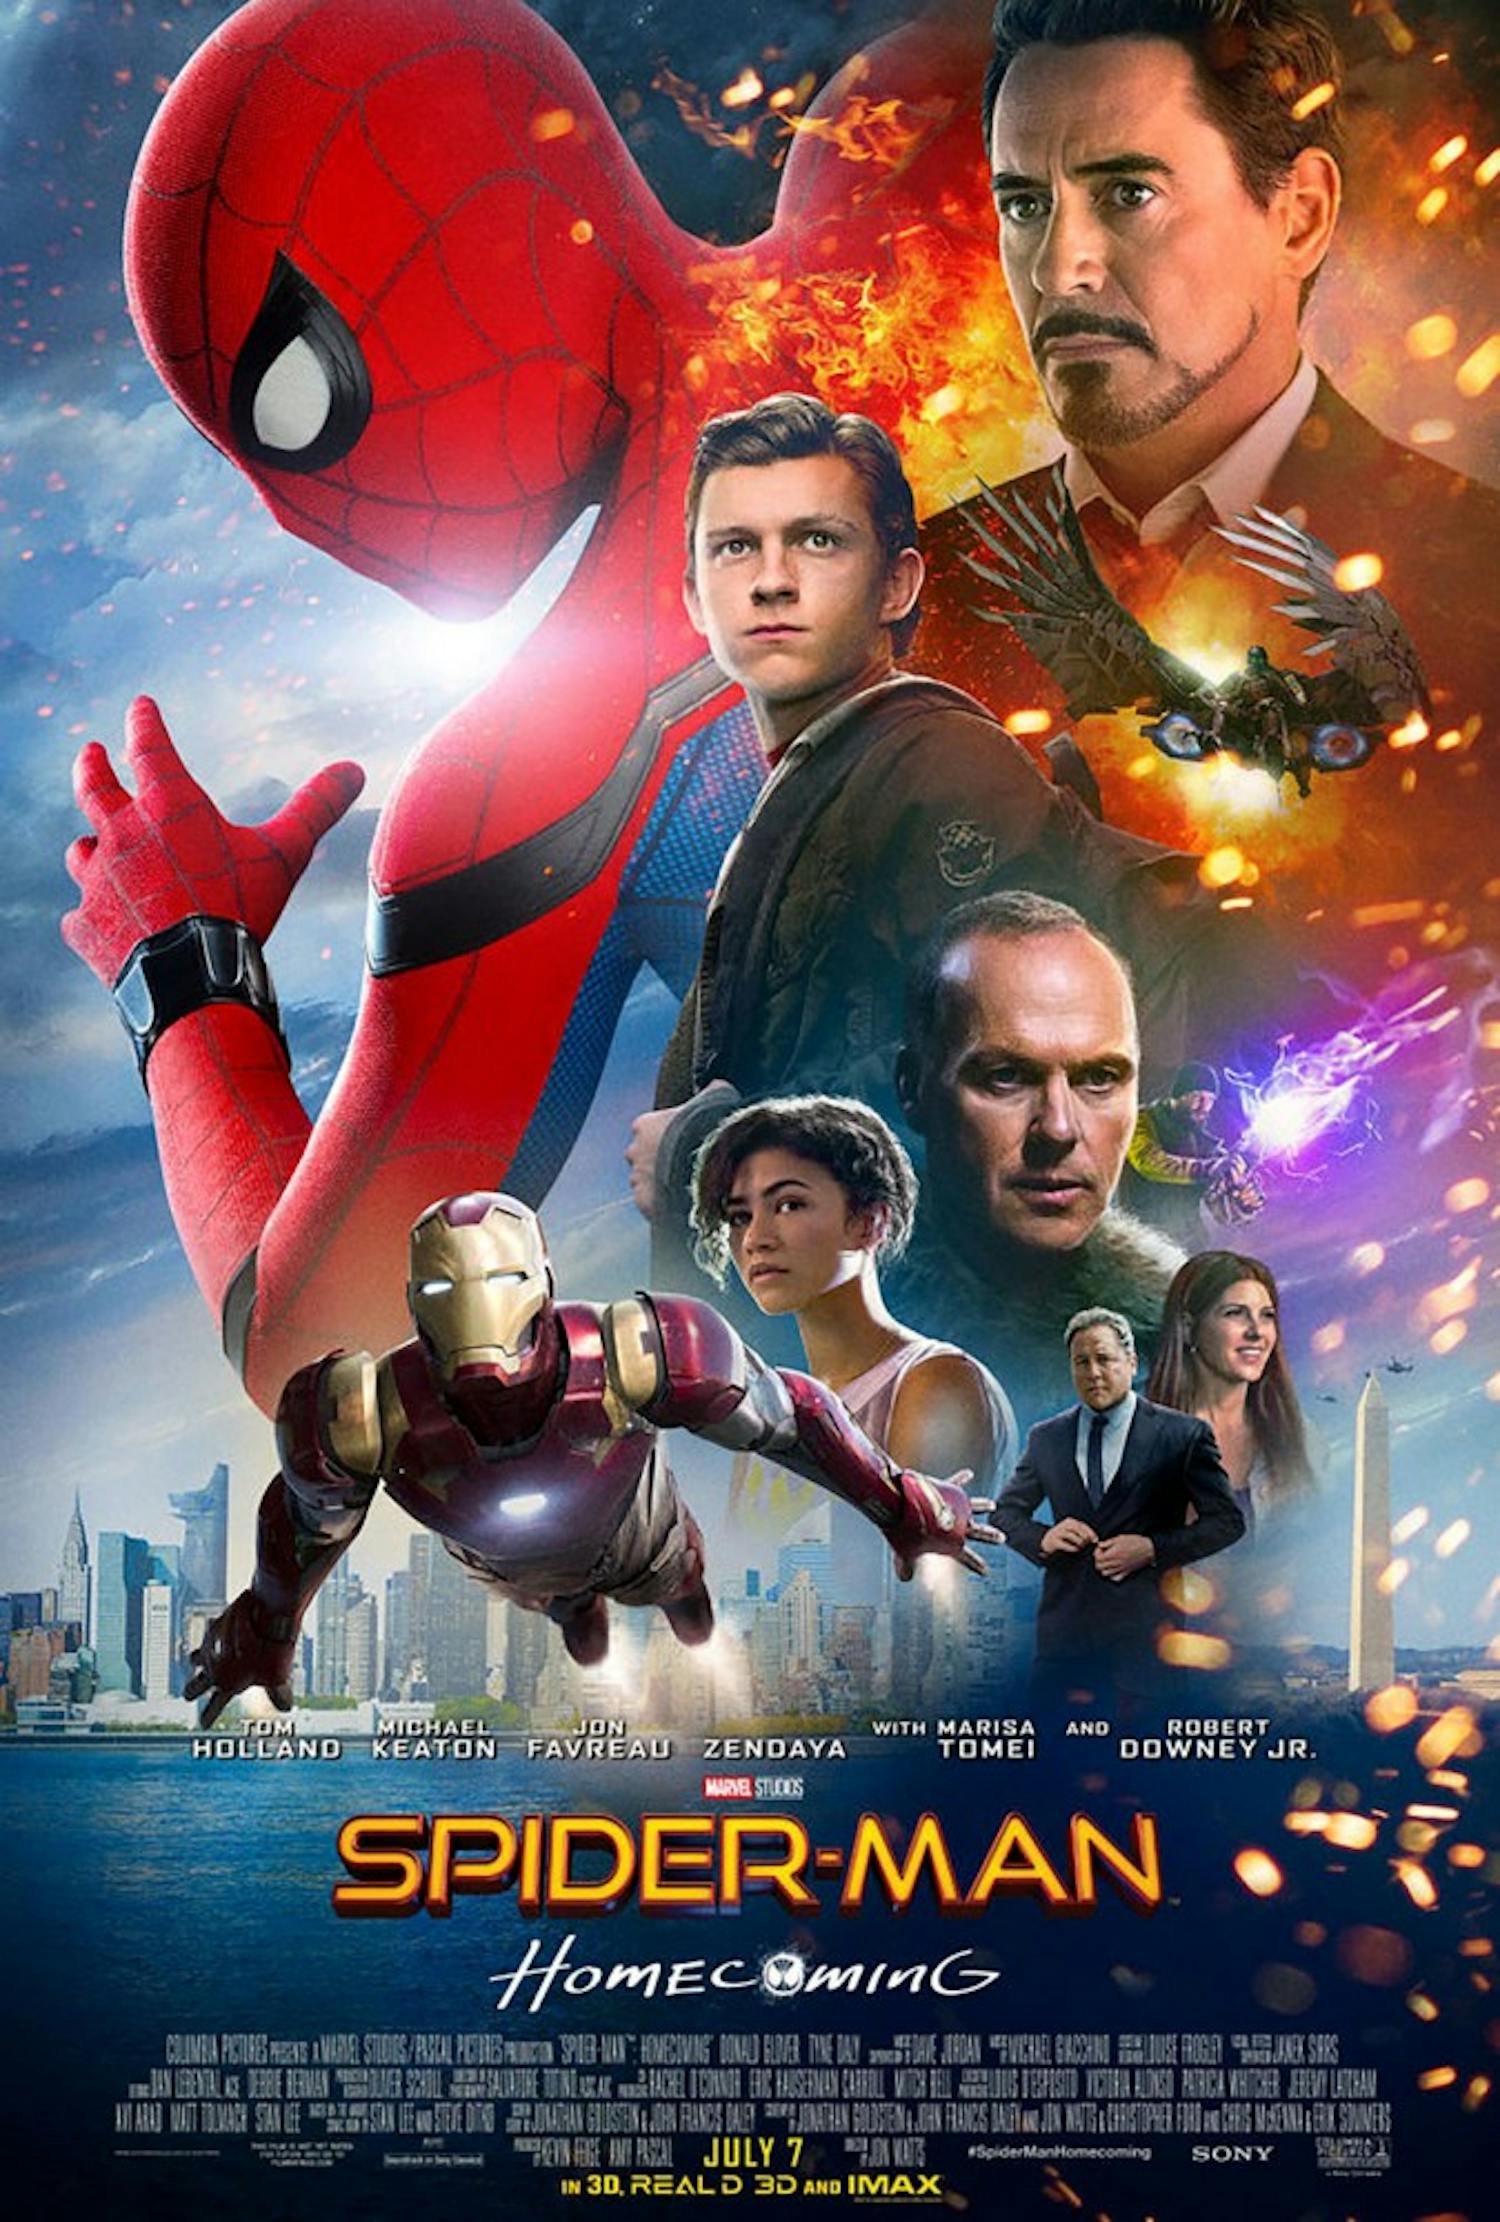 "Spider-Man: Homecoming" is one of the must-see movies being released this summer.&nbsp;